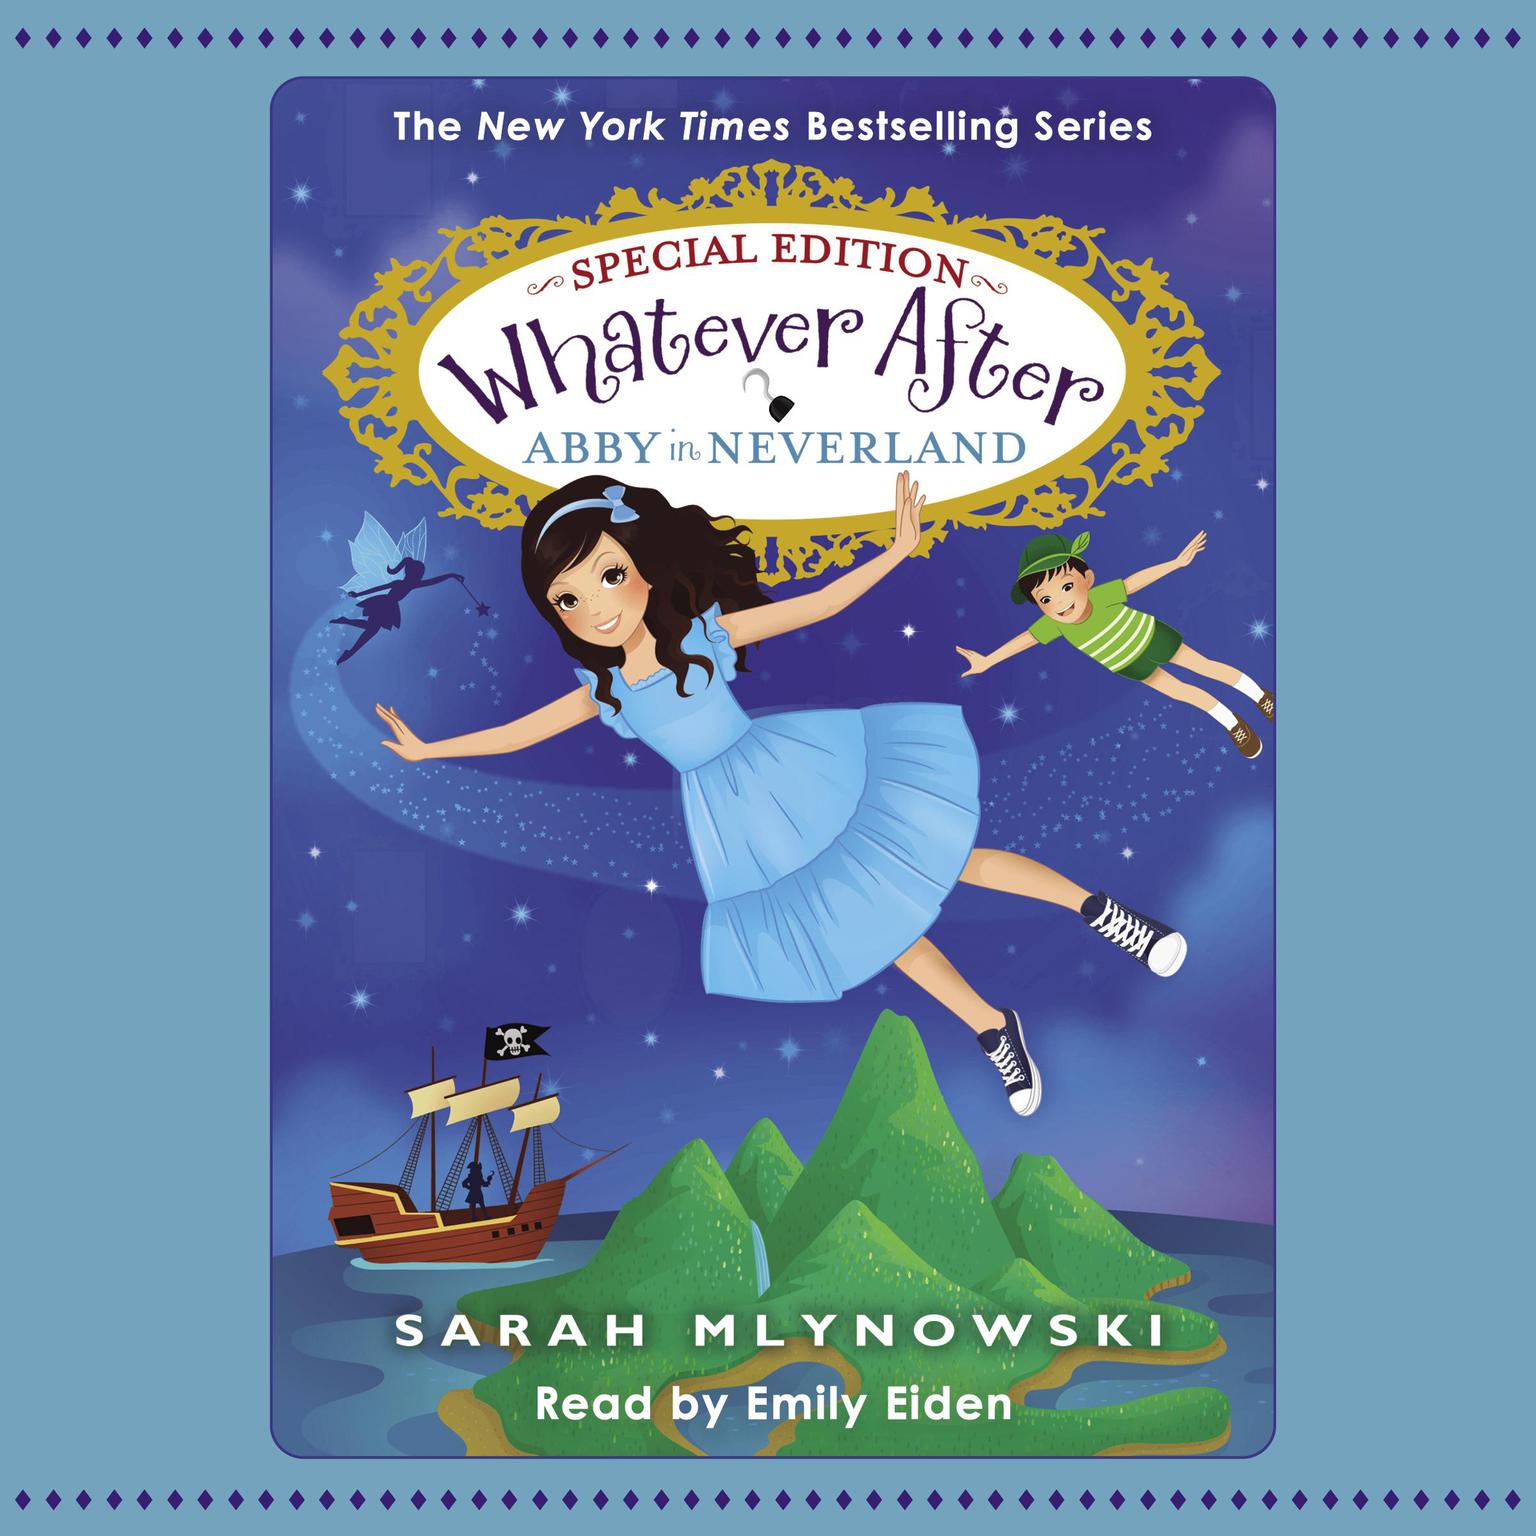 Abby in Neverland (Whatever After Special Edition #3) Audiobook, by Sarah Mlynowski